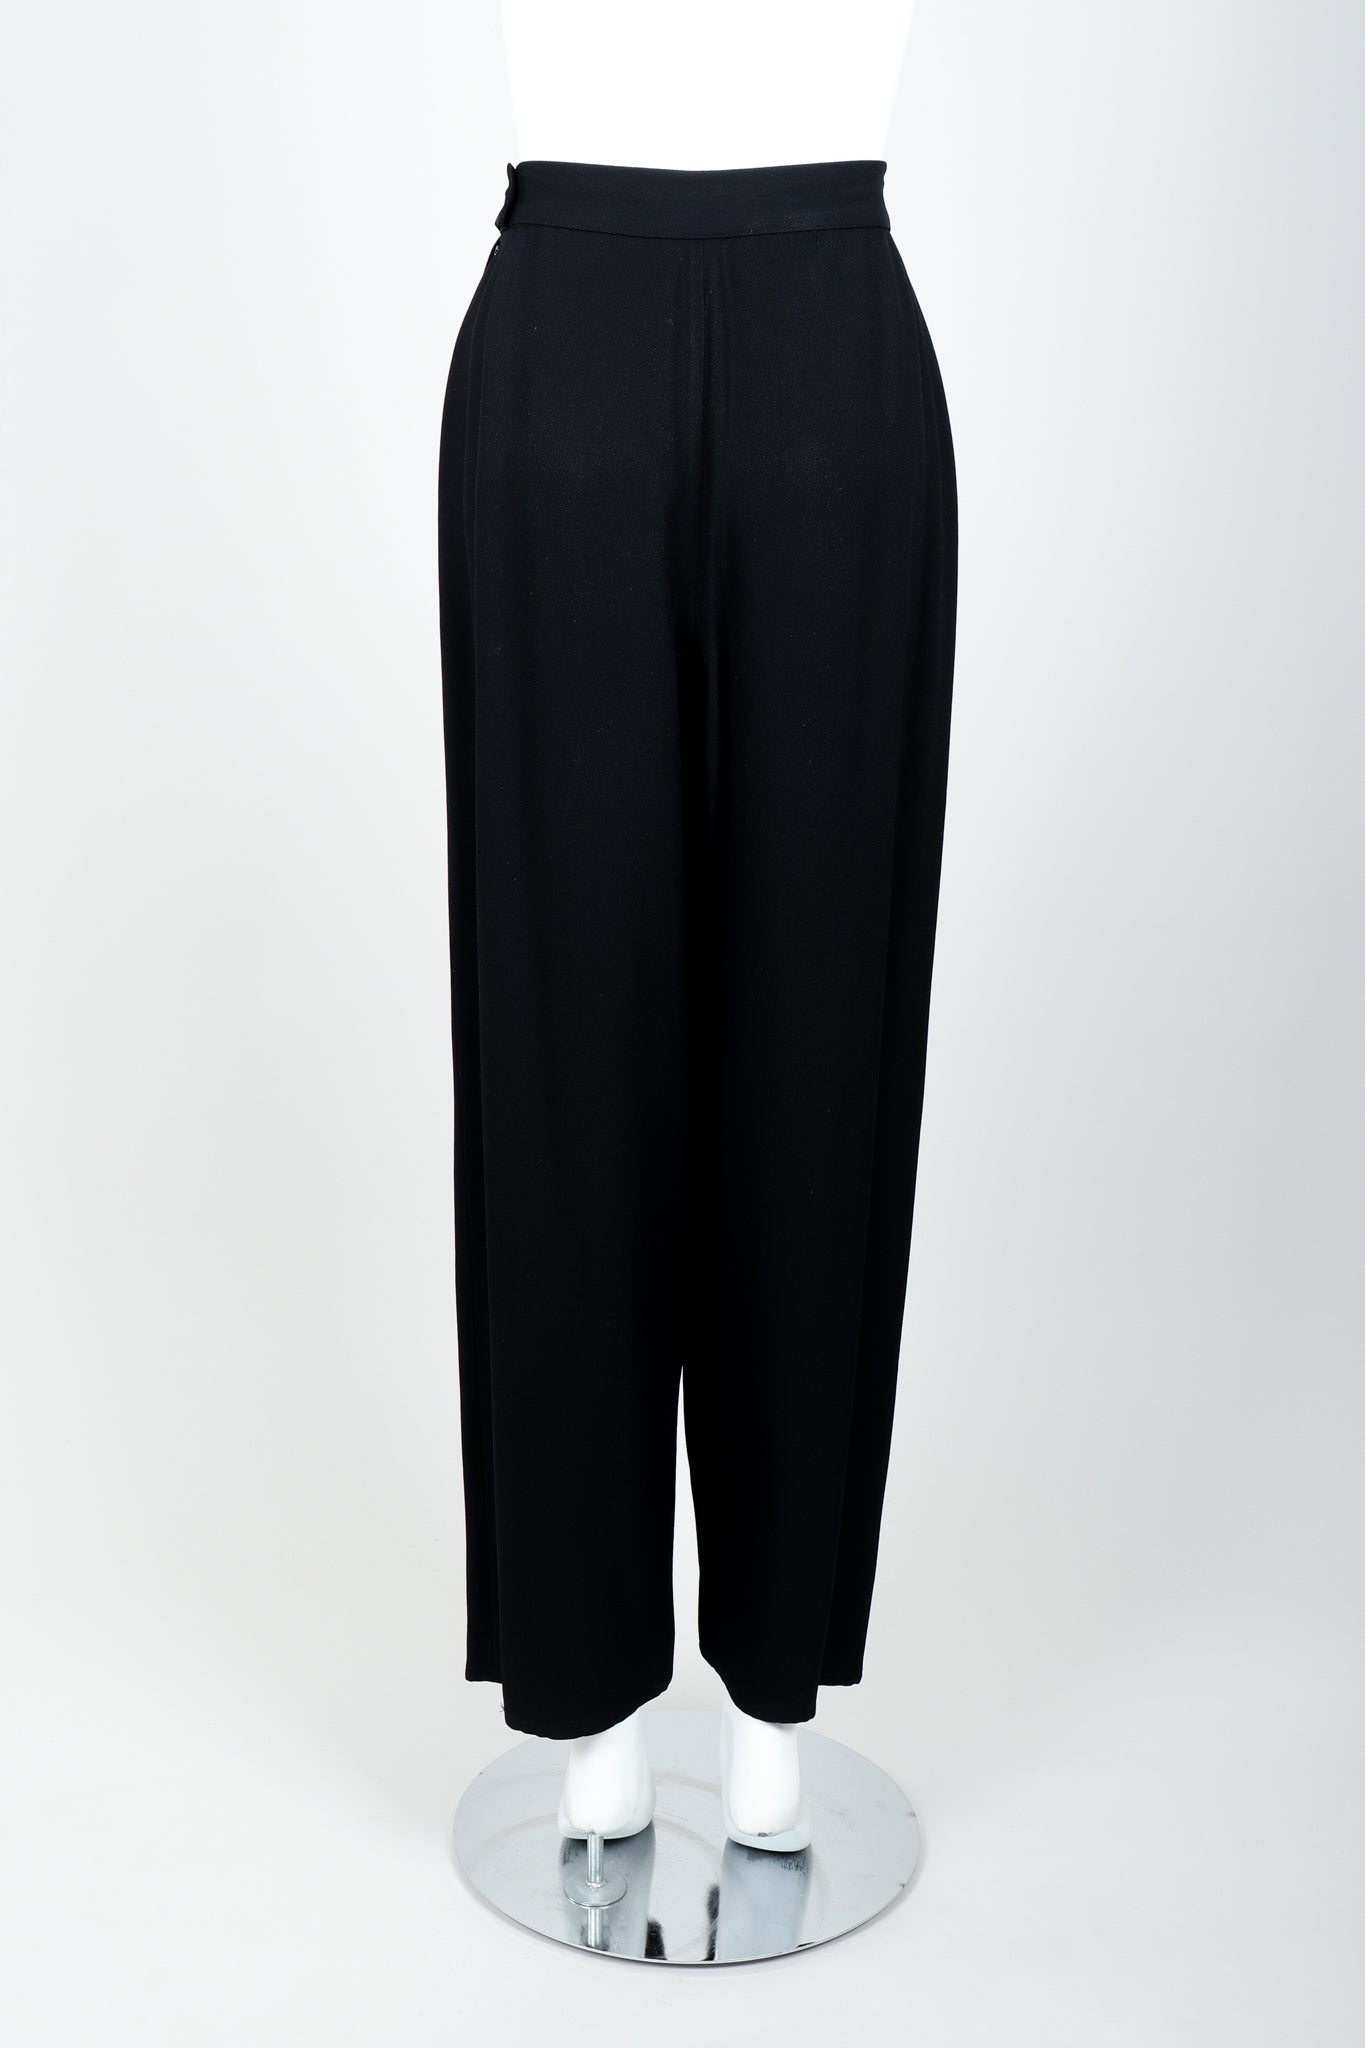 Vintage Sonia Rykiel Chanel Style Crepe Pant Suit on Mannequin back at Recess